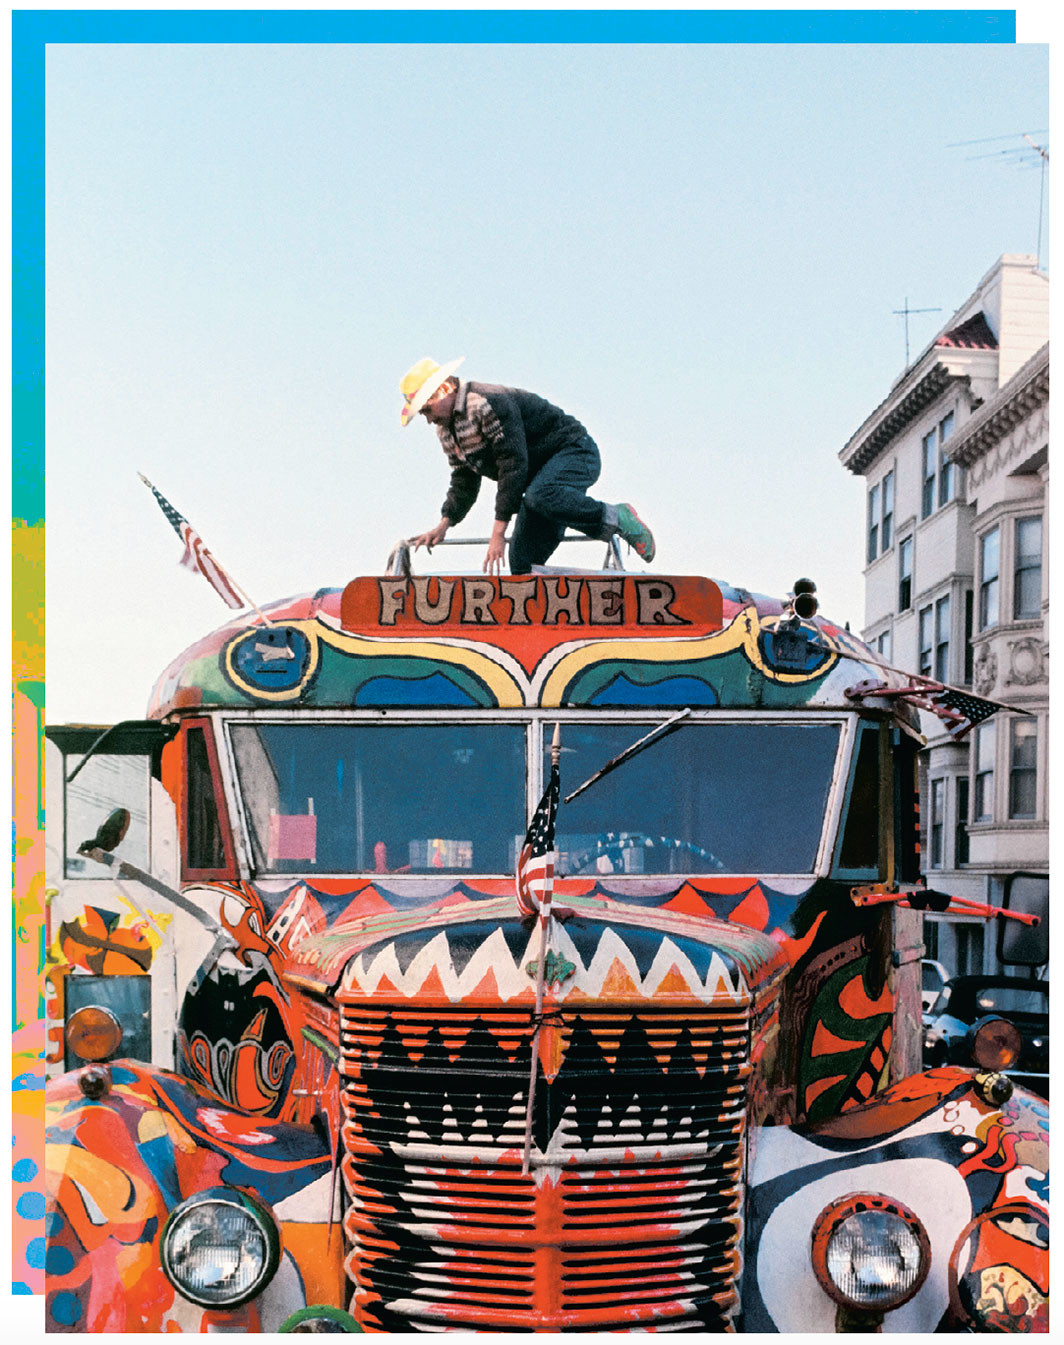 Ken Kesey’s Merry Pranksters bus “Further,” San Francisco, 1966. Ted Streshinsky Photographic Archive, Bancroft Library, U.C. Berkeley, Courtesy of Taschen/From Tom Wolfe’s The Electric Kool-Aid Acid Test (Taschen, 2014)